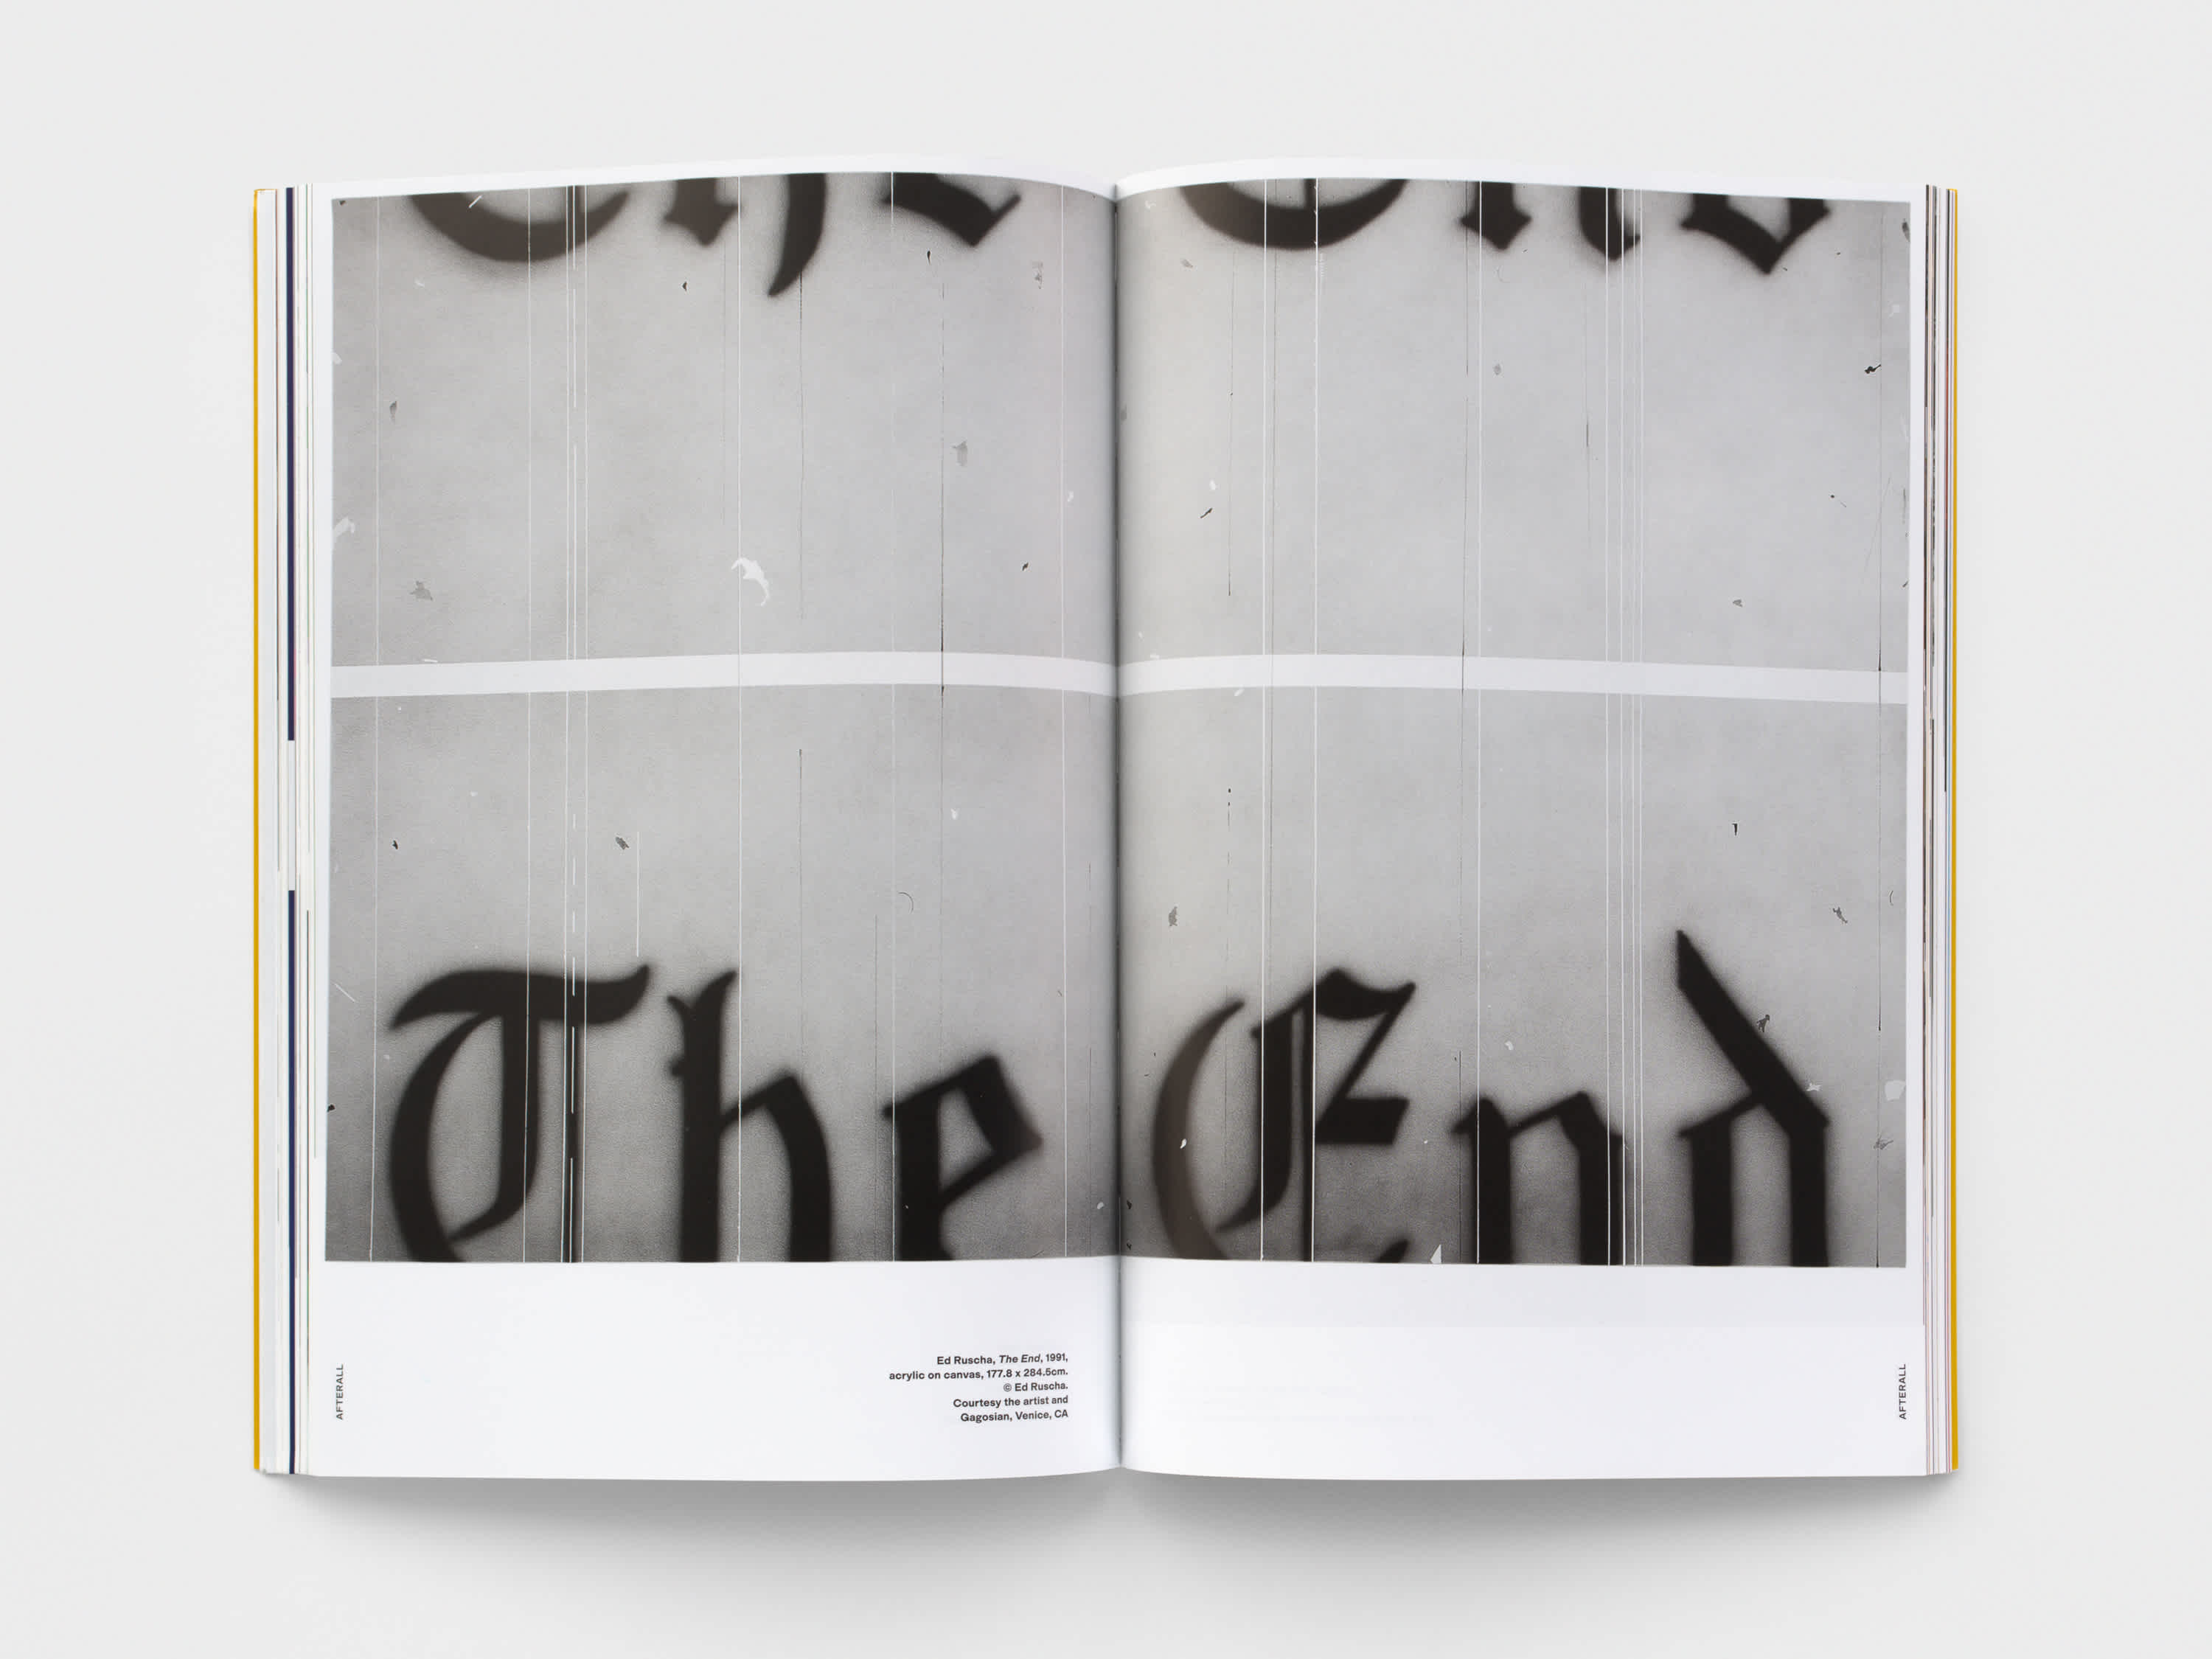 Open magazine with black and white centerfold image. A white band runs horizontally along the bottom of the two pages.